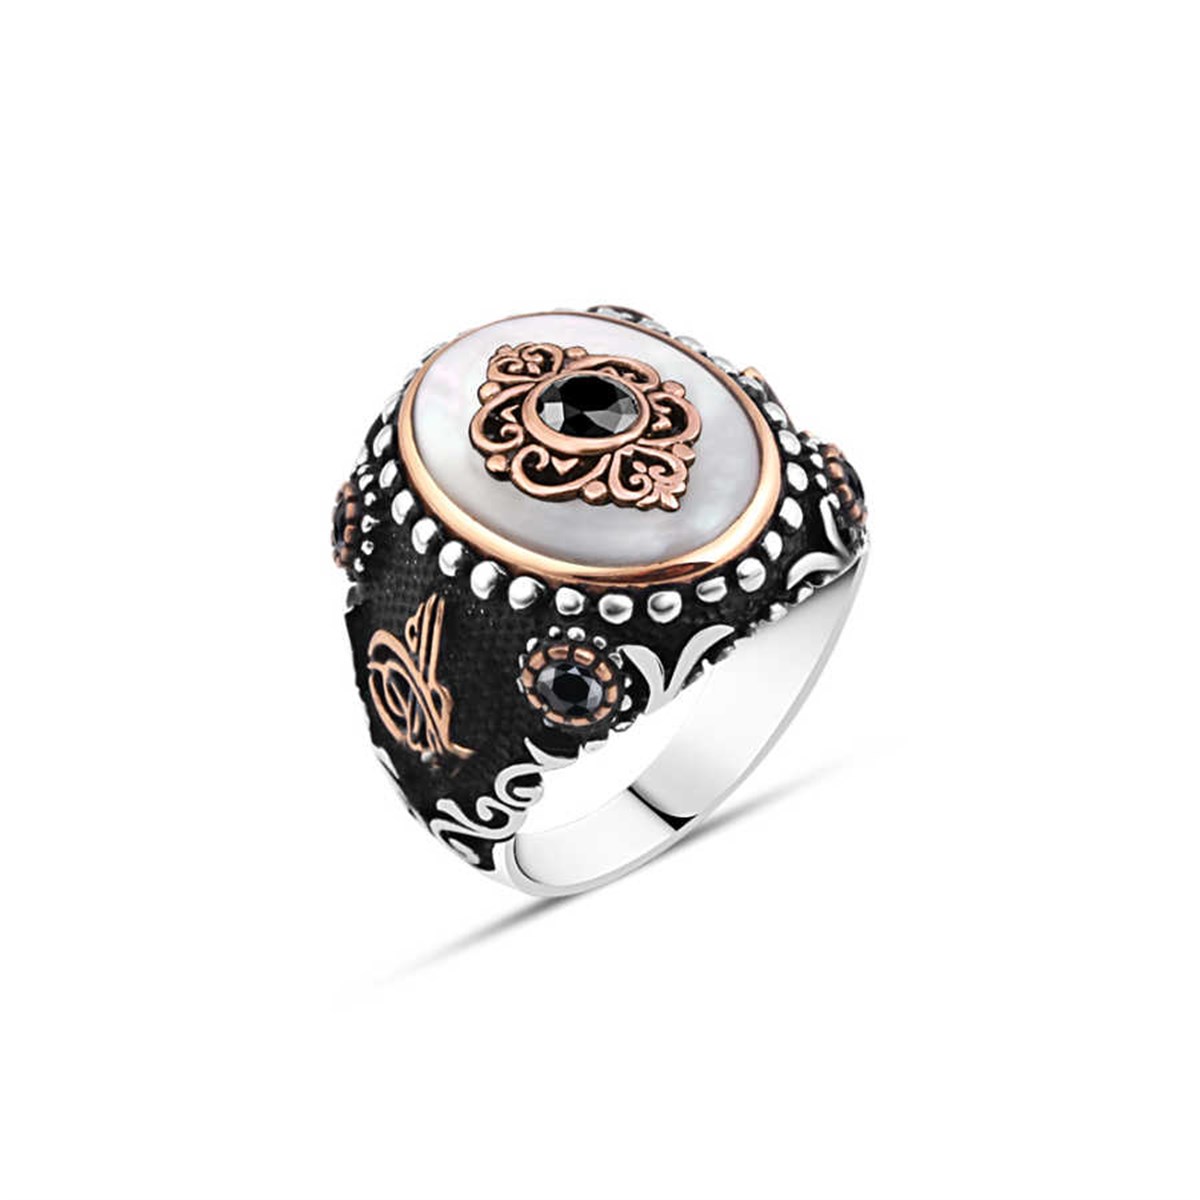 Mother-of-Pearl Stone Motif Sterling Silver Men's Ring with Zircon in the Middle